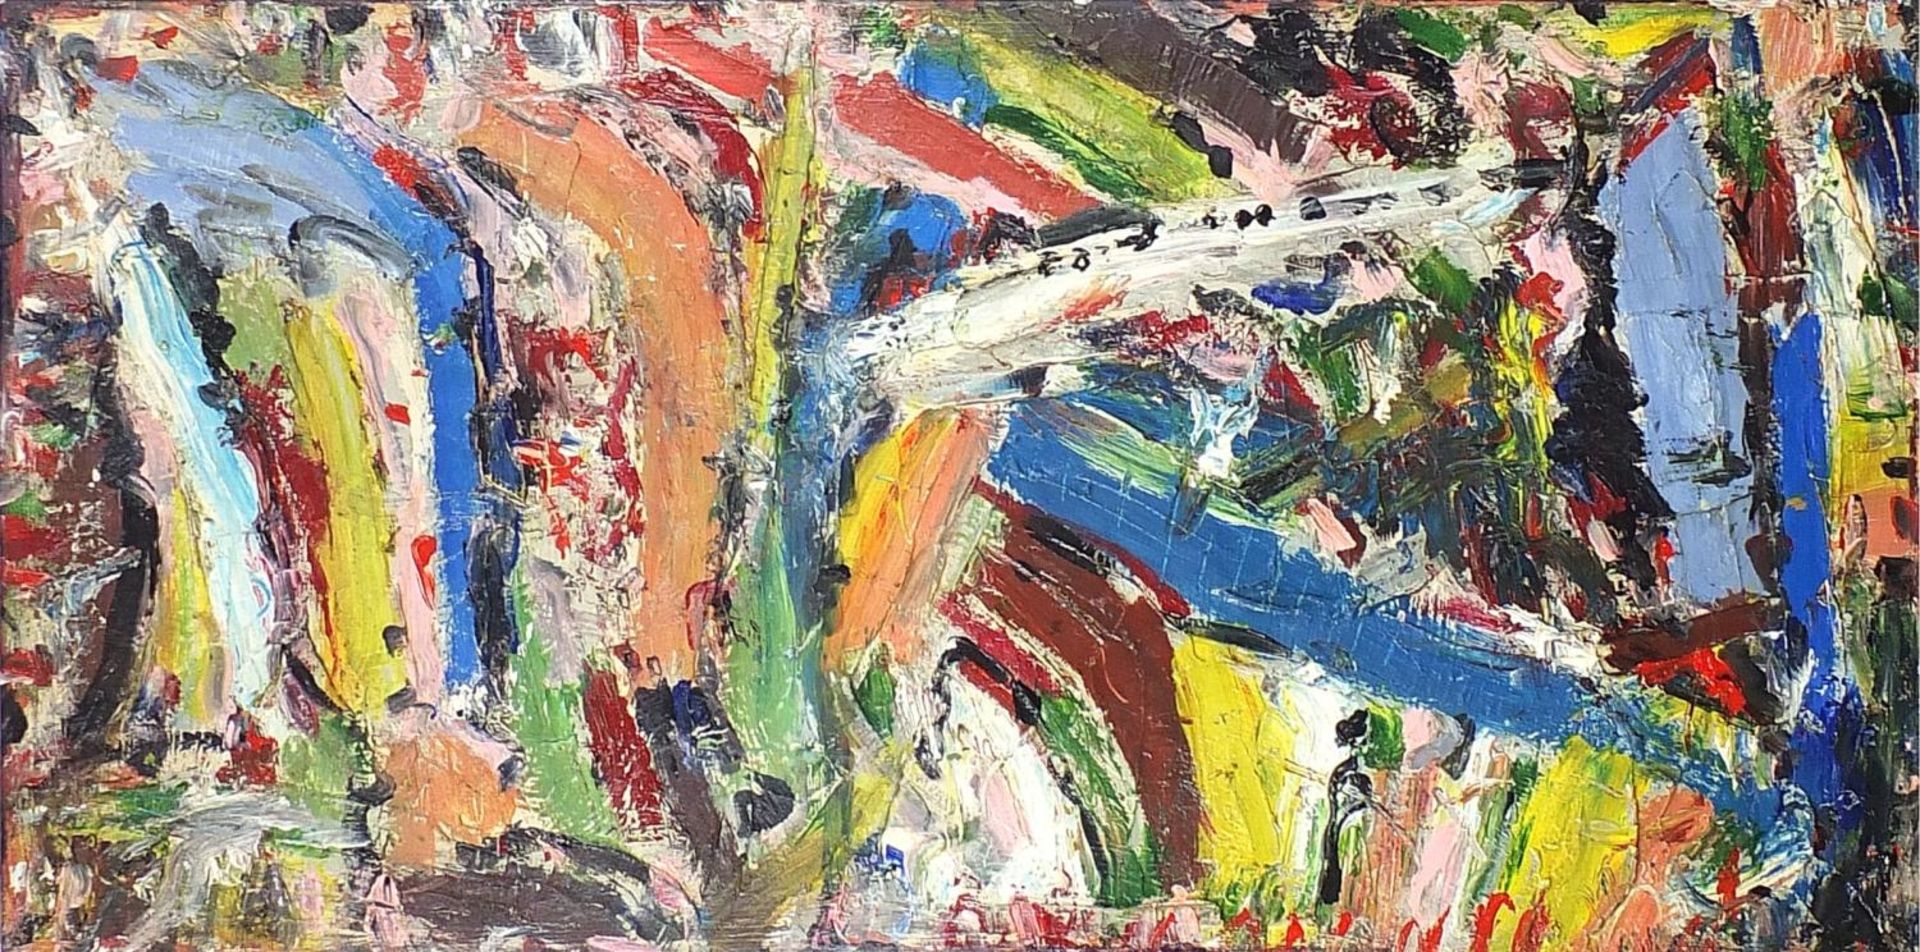 Abstract composition, New York Expressionist oil on canvas, unframed, 122cm x 60.5cm